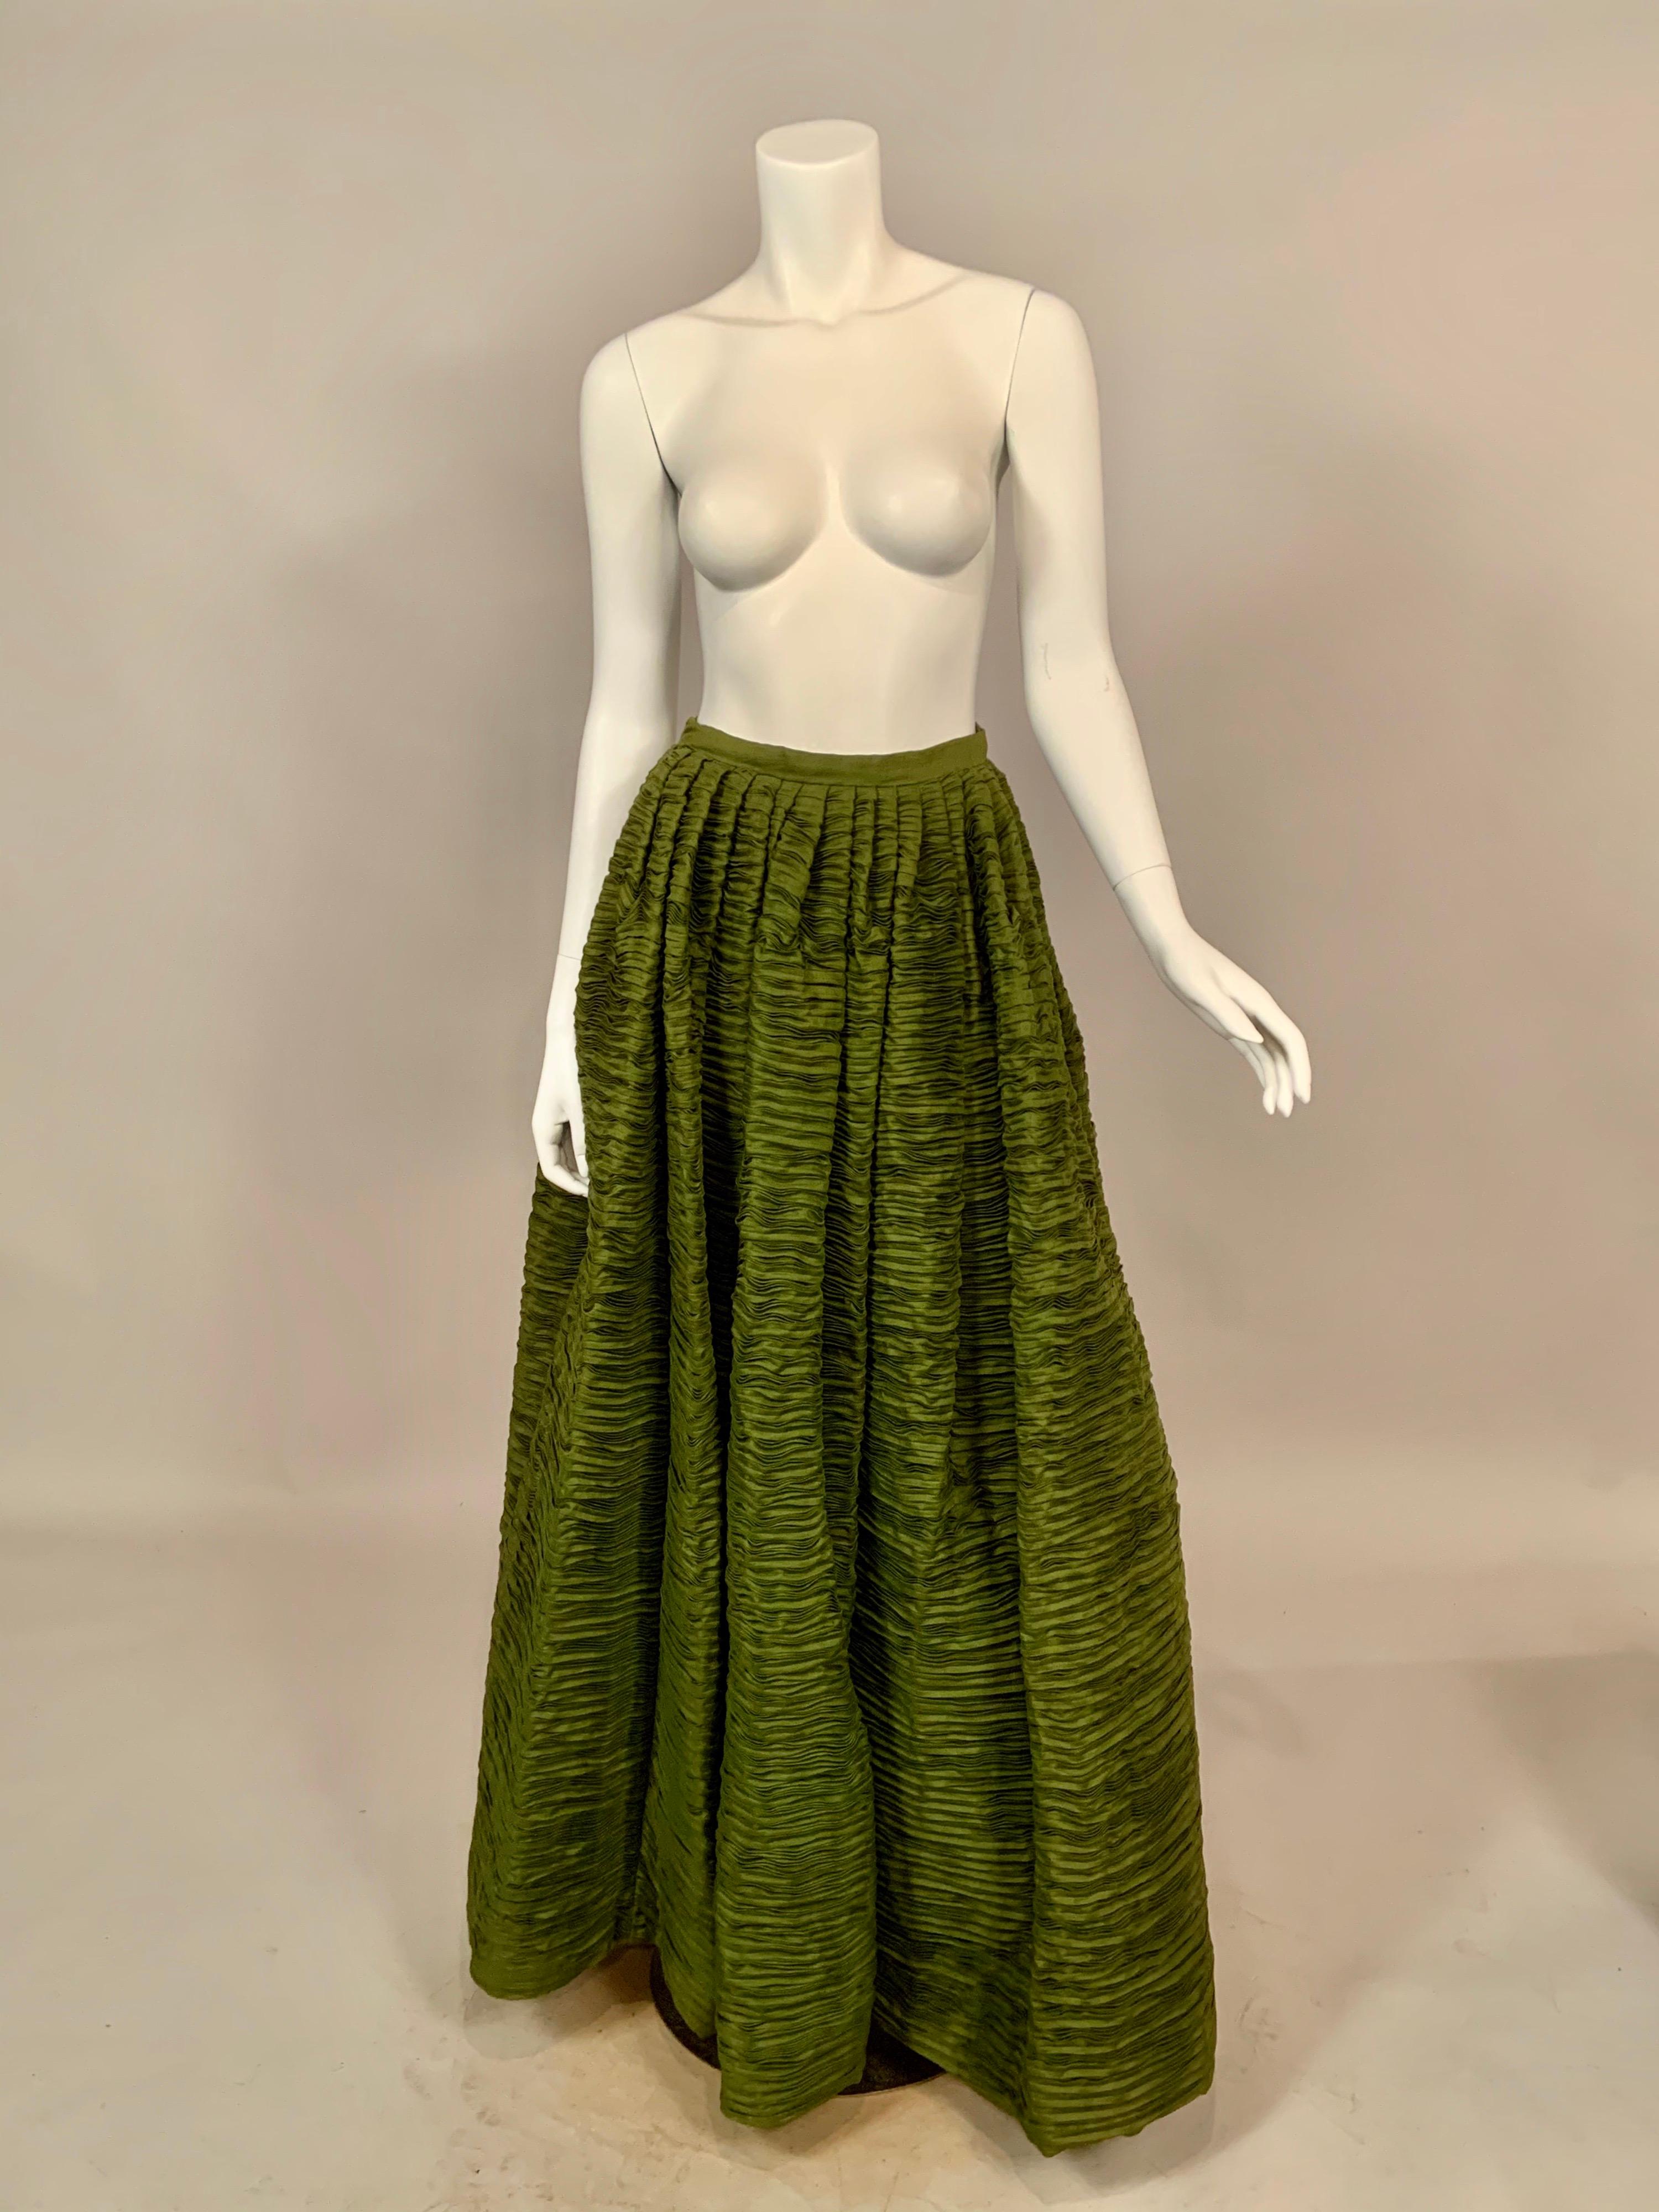 Known as the Irish Couturier, Sybil Connolly is most famous for her extremely rare pleated linen clothing. She used fabrics that were produced in Ireland almost exclusively, and the linen in this skirt is an example of the quality workmanship.  Each